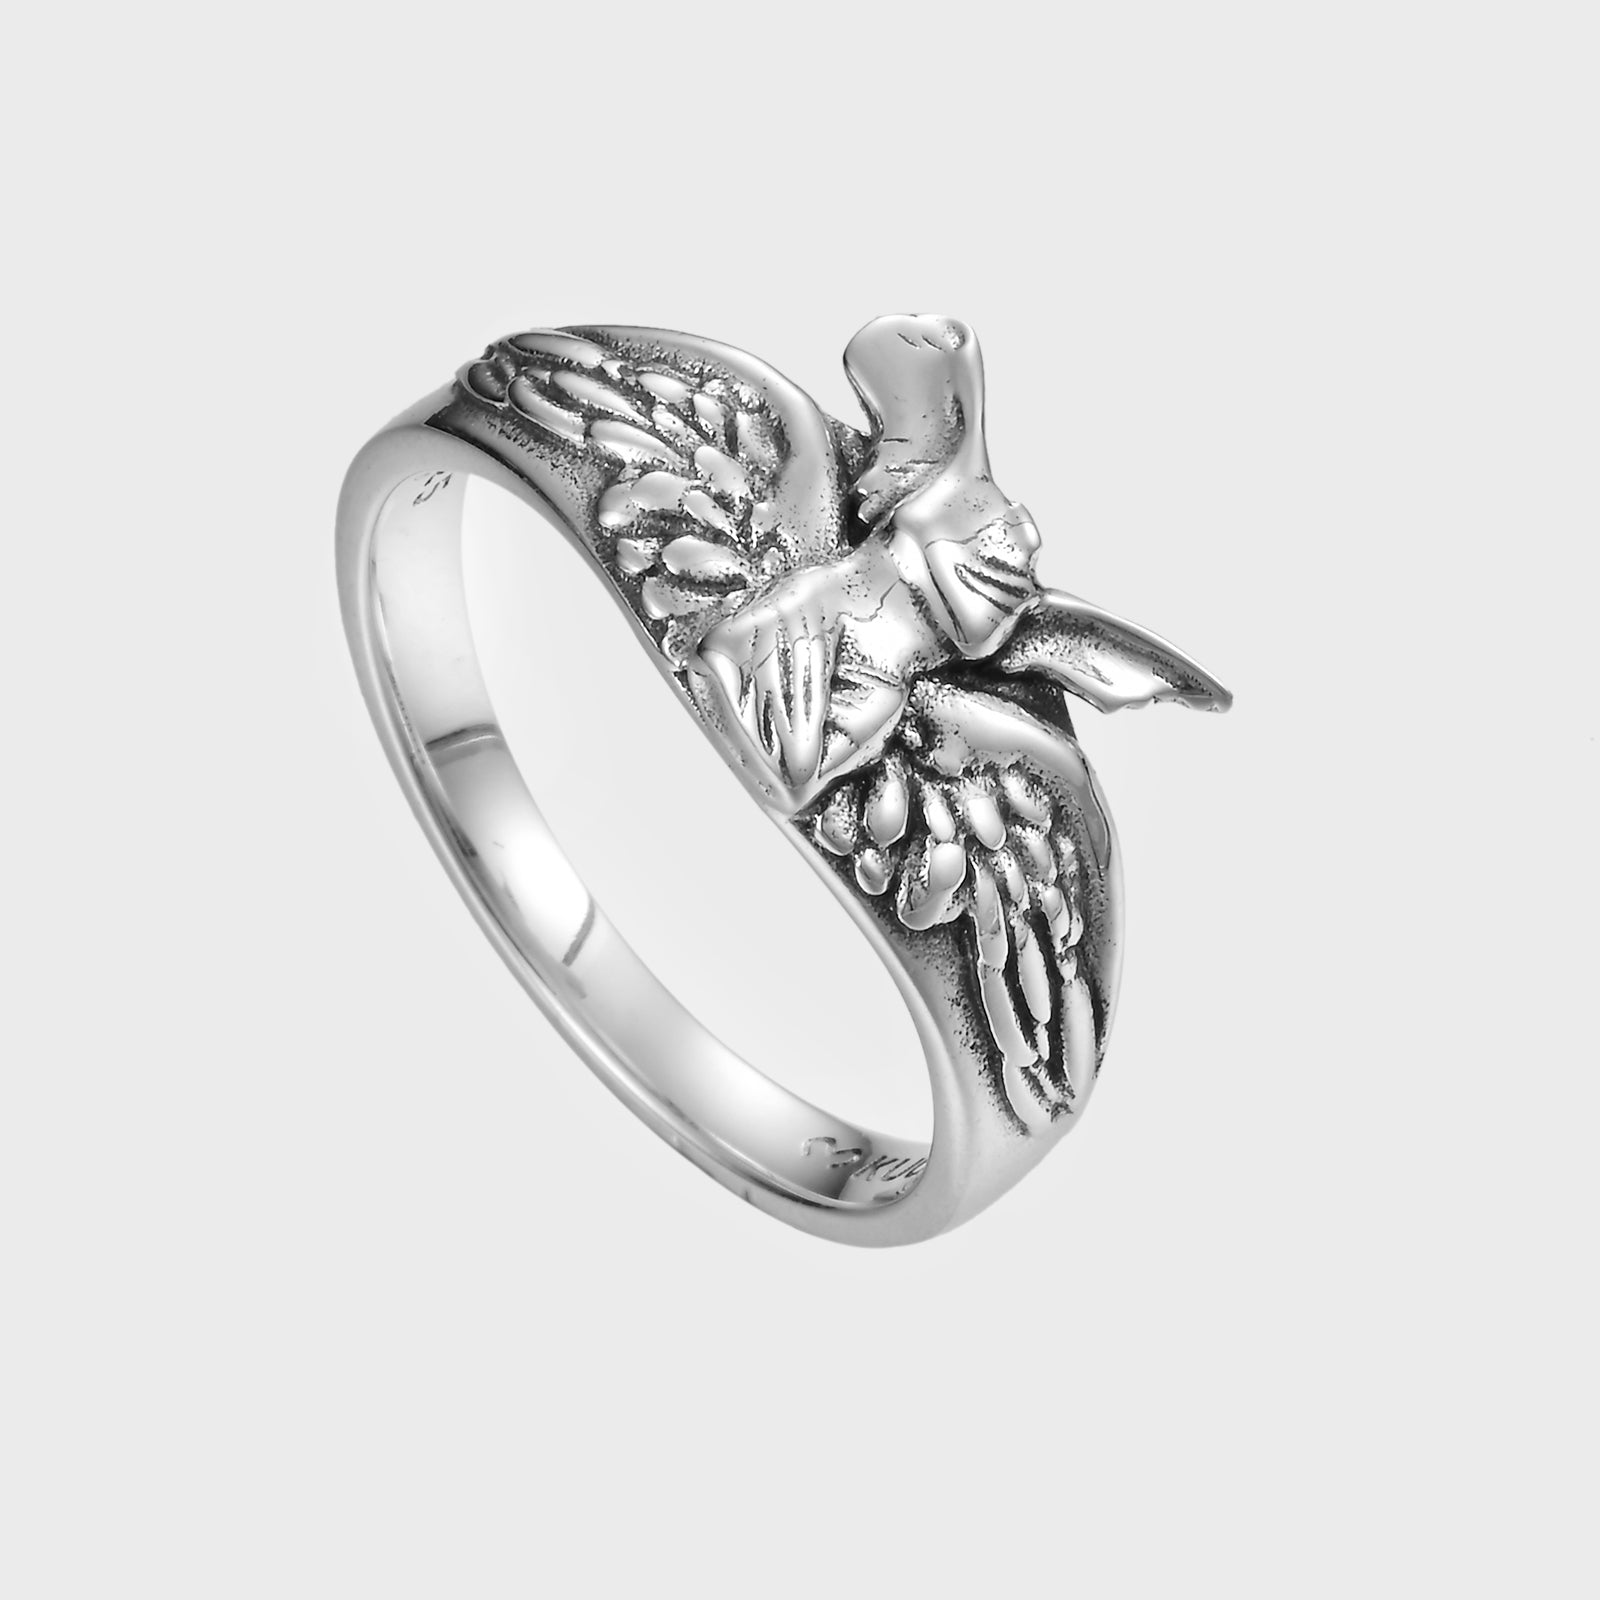 Winged Victory of Samothrace - Ring